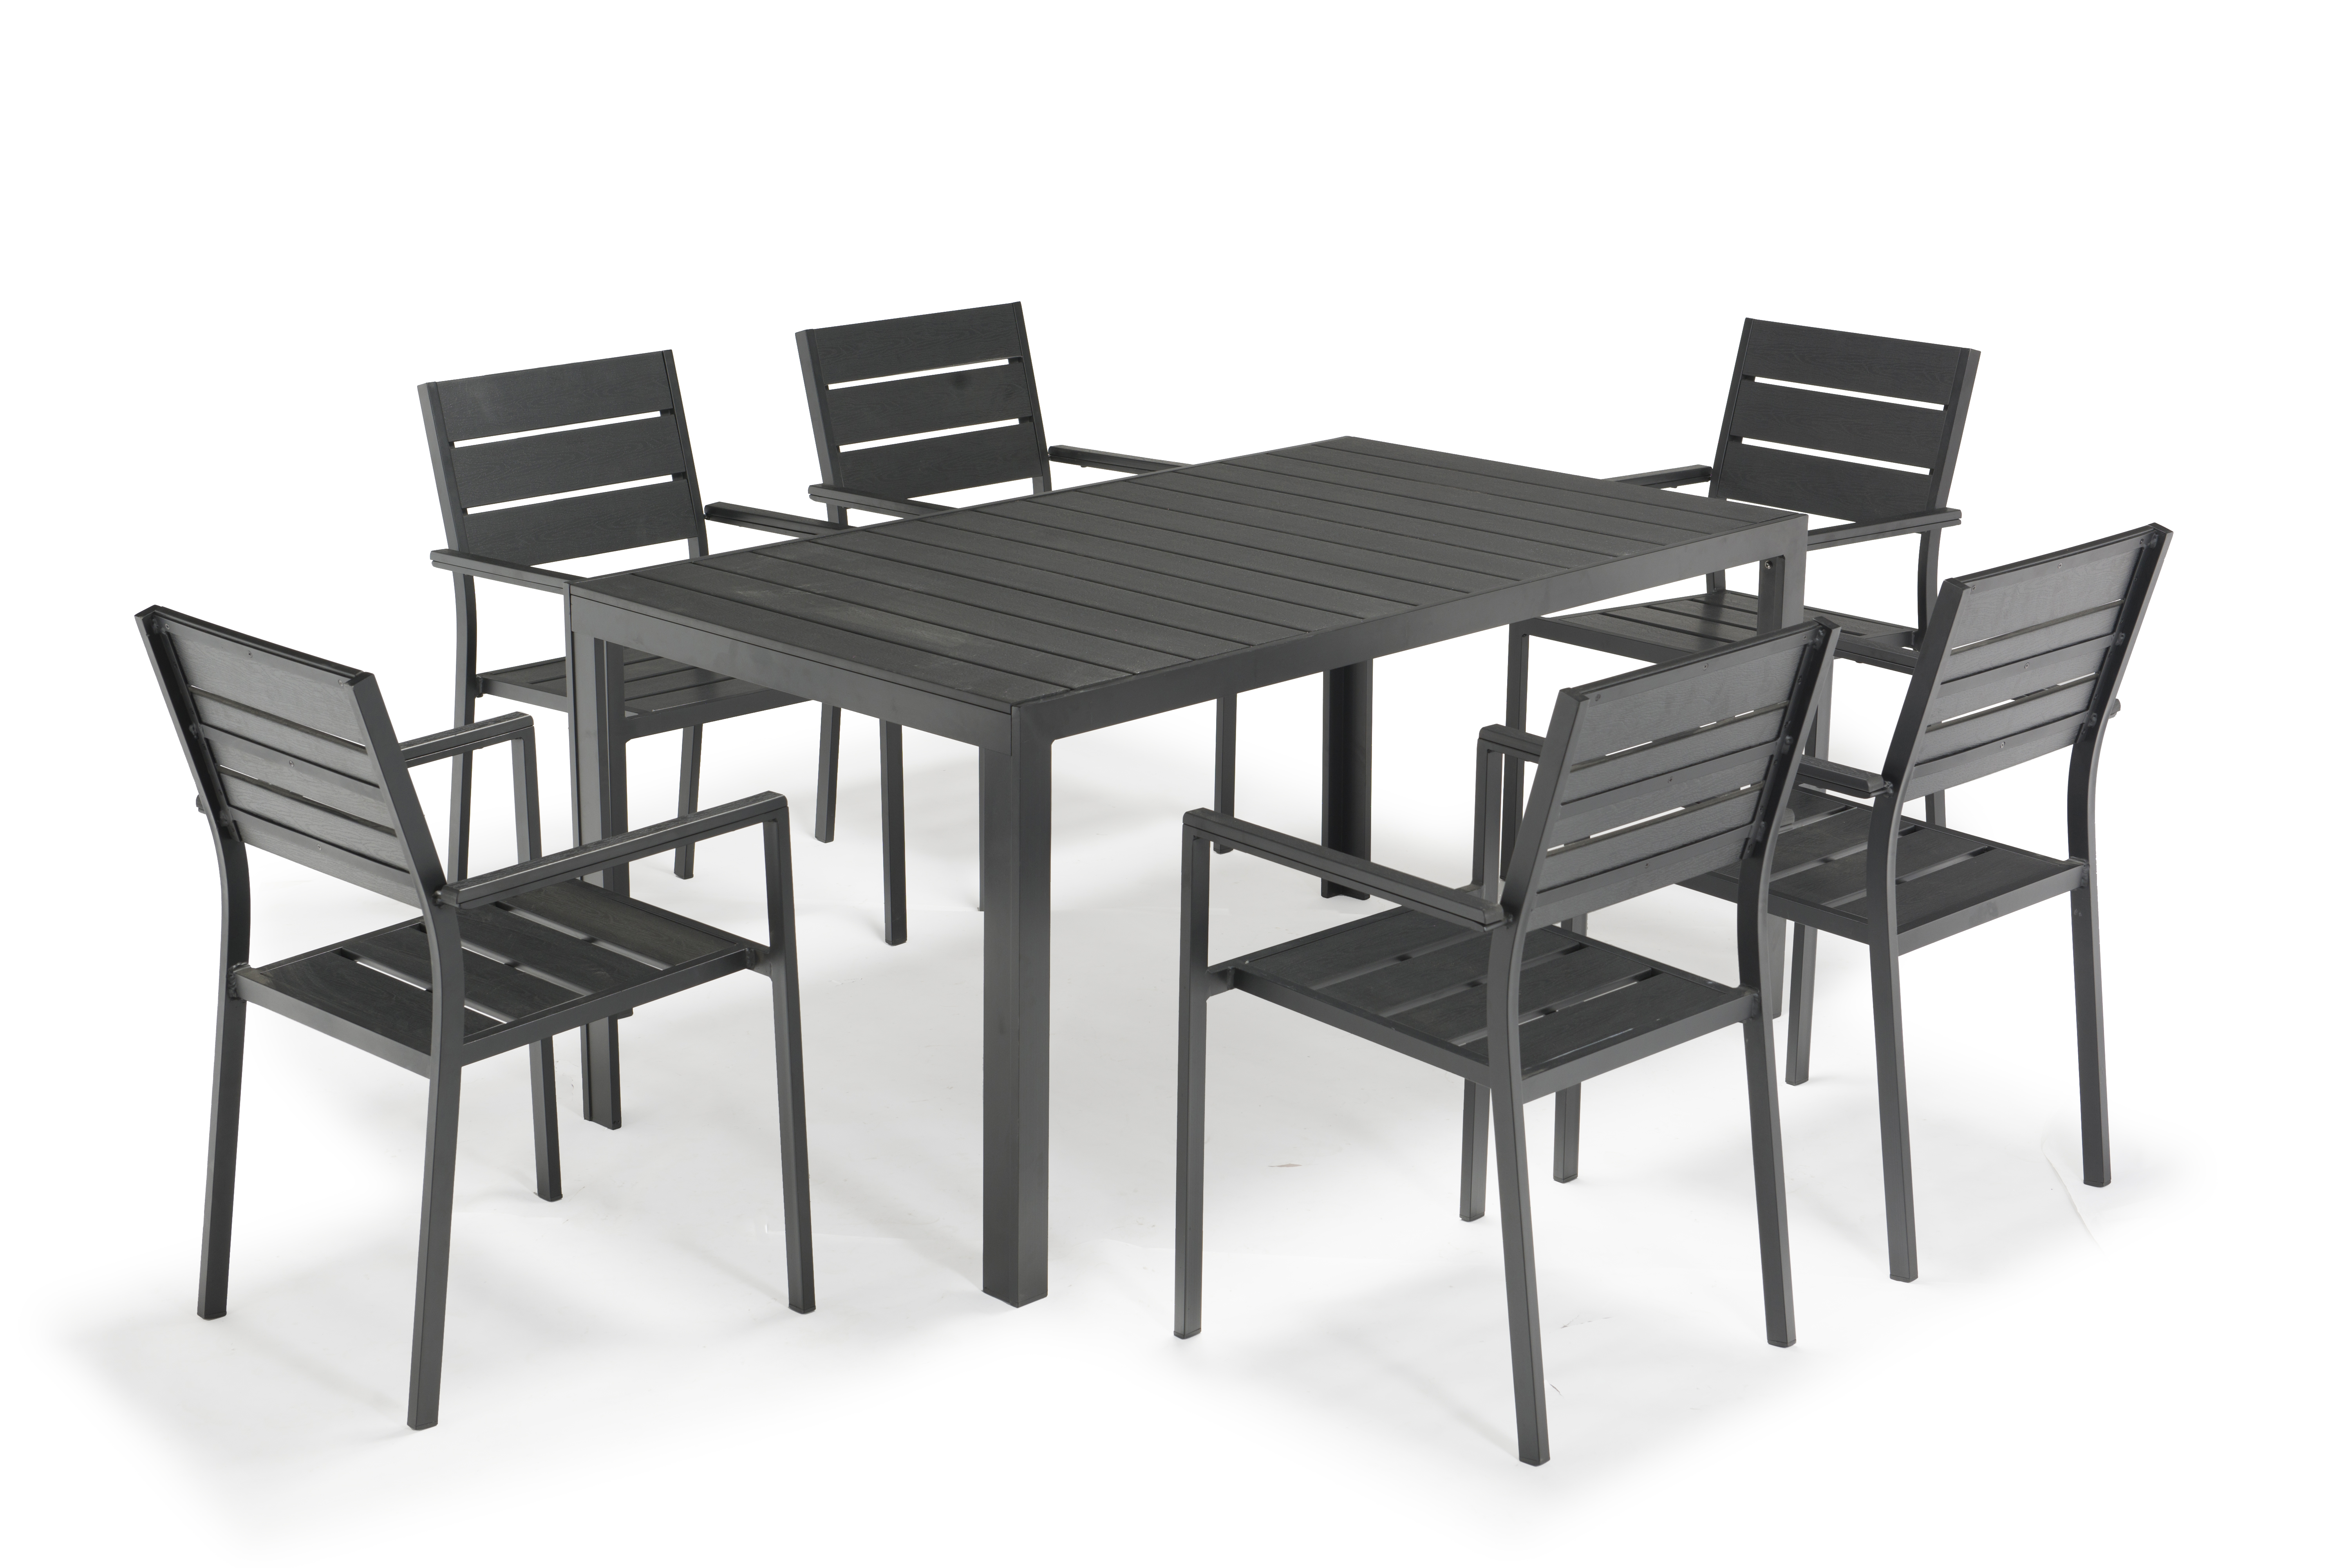 Uplion Outdoor wholesale garden synthetic plastic wood furniture dining table and chair set